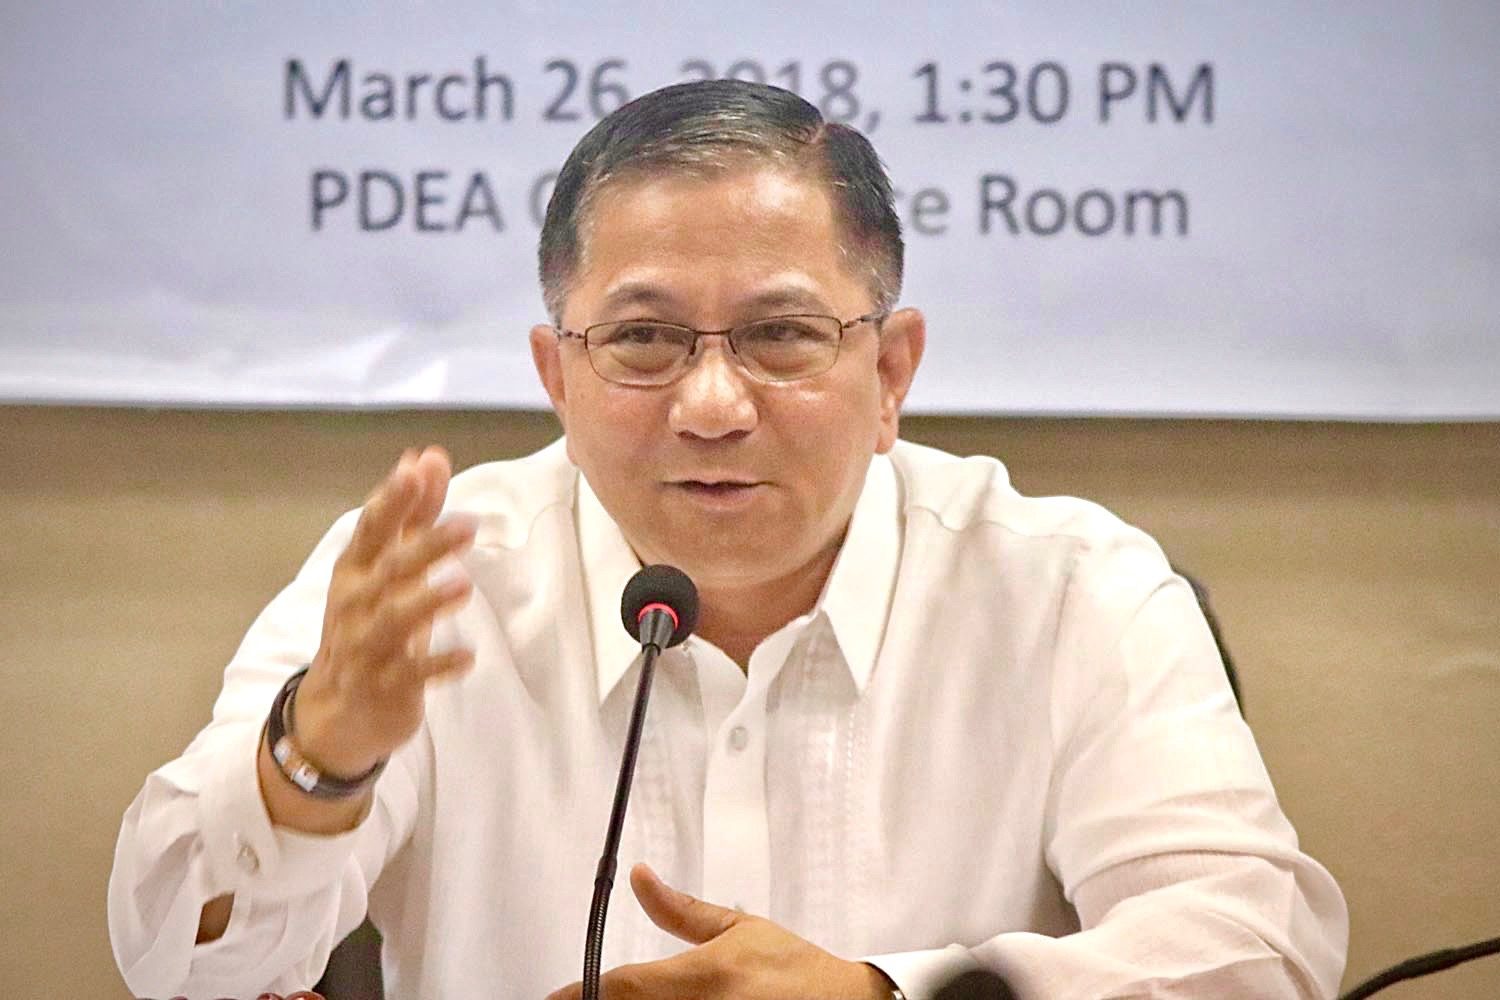 PDEA names hundreds of barangay officials linked to drugs